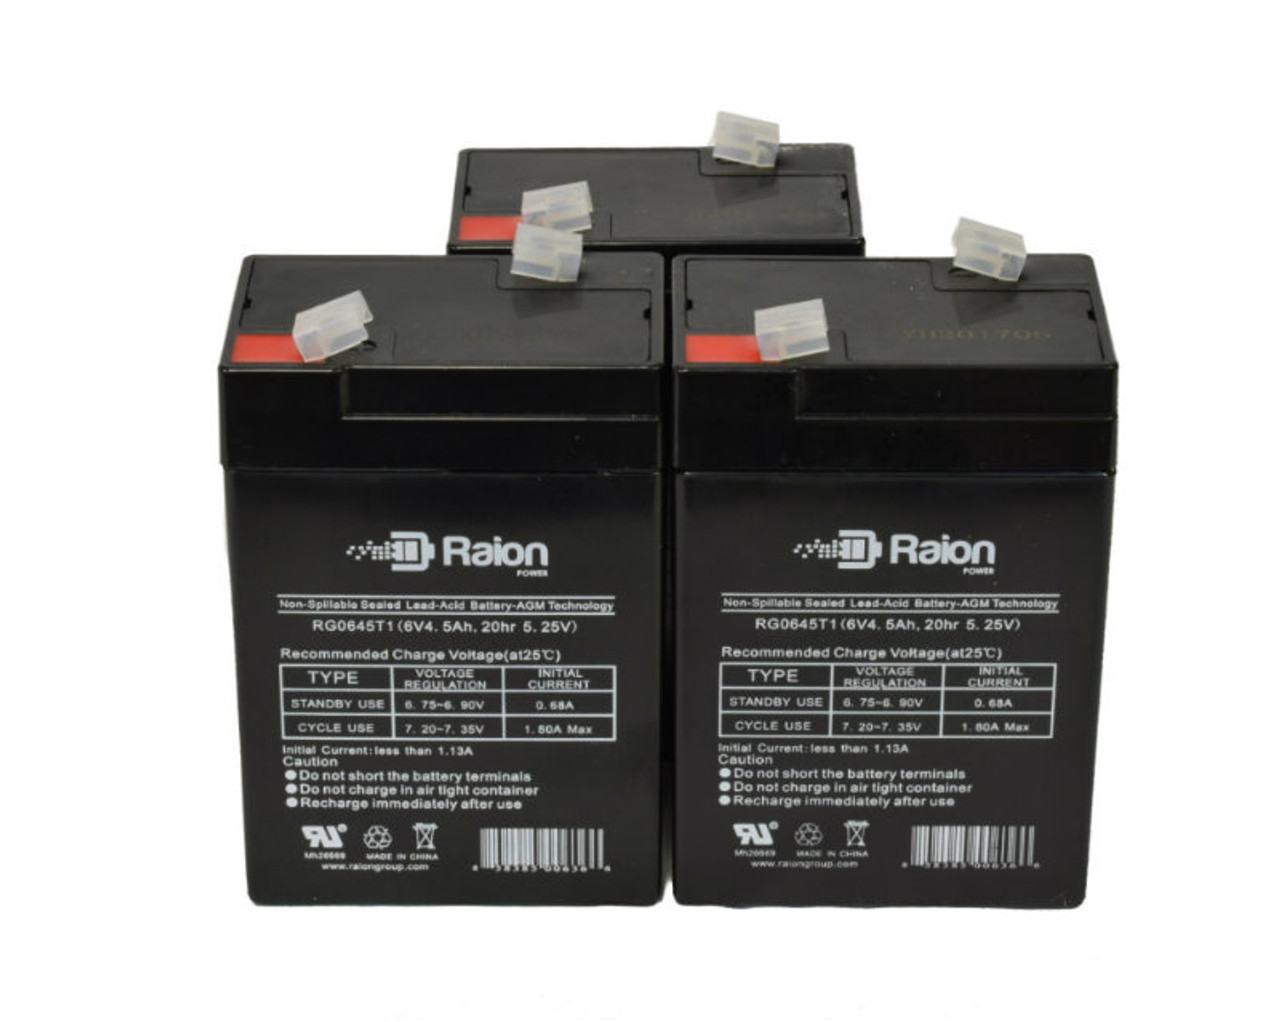 Raion Power 6V 4.5Ah Replacement Emergency Light Battery for Power Mate PM640/PM645 - 3 Pack